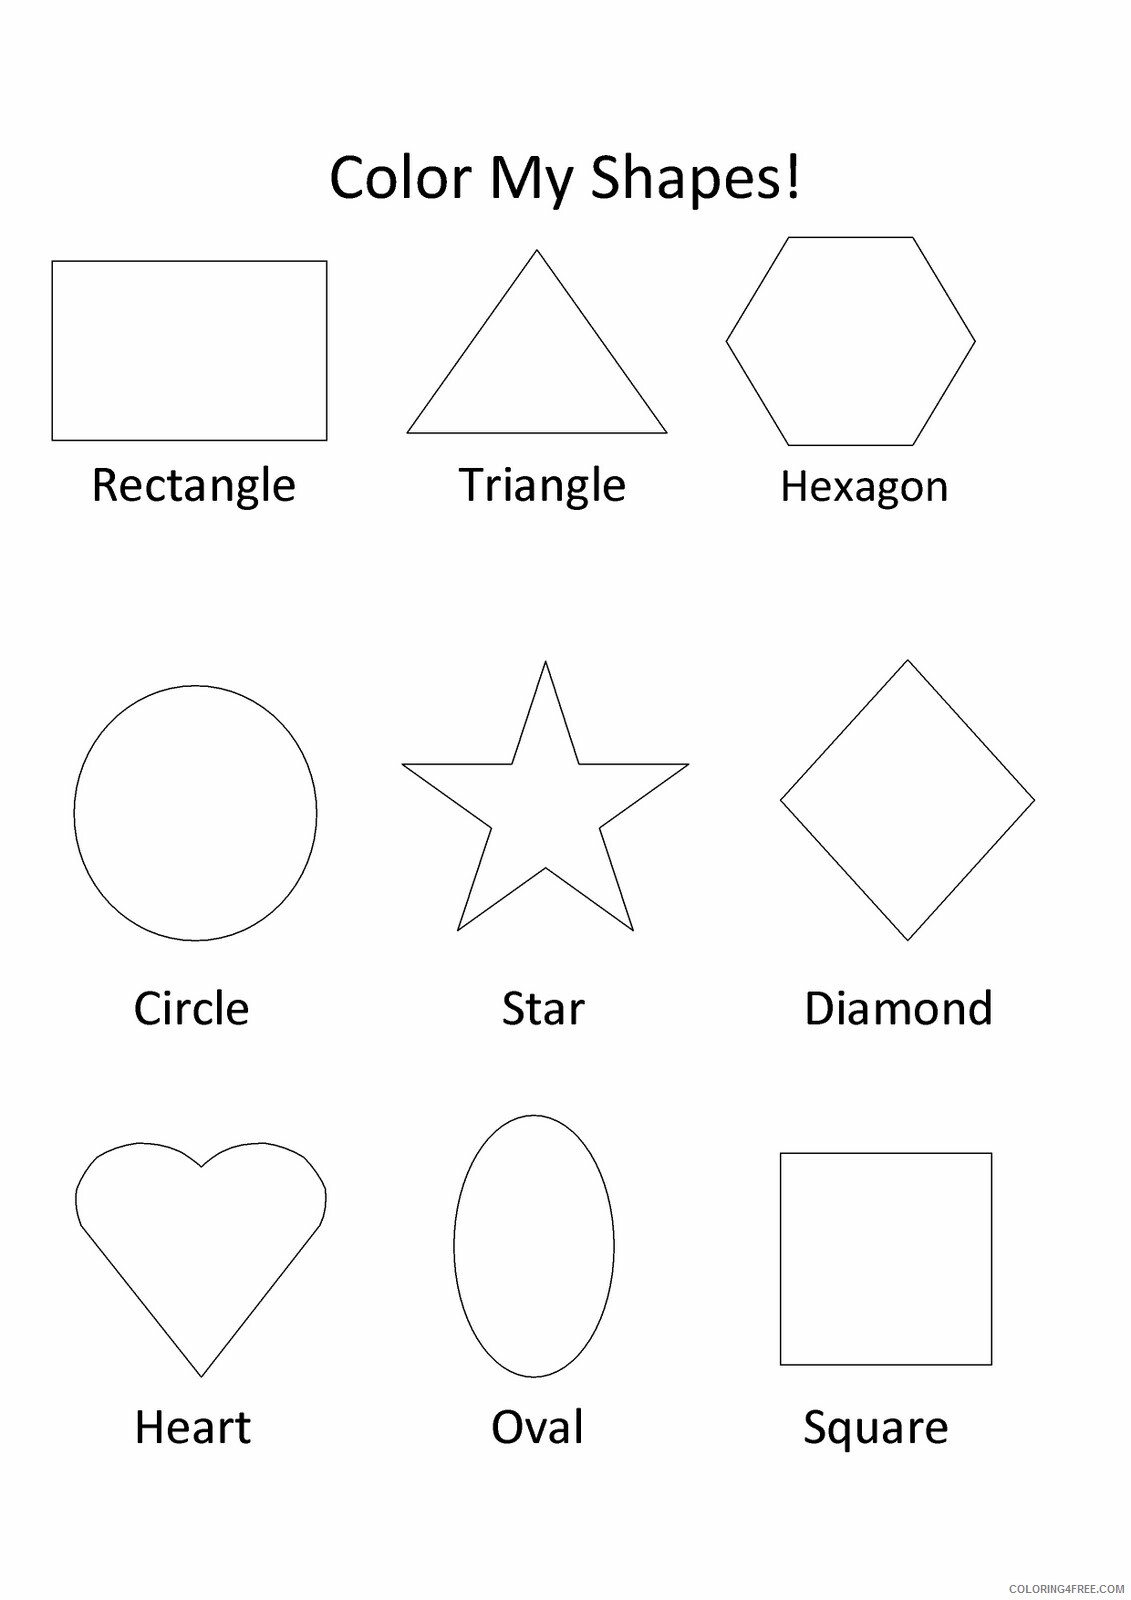 Shapes Coloring Pages Educational Color My Shapes Printable 2020 1857 Coloring4free